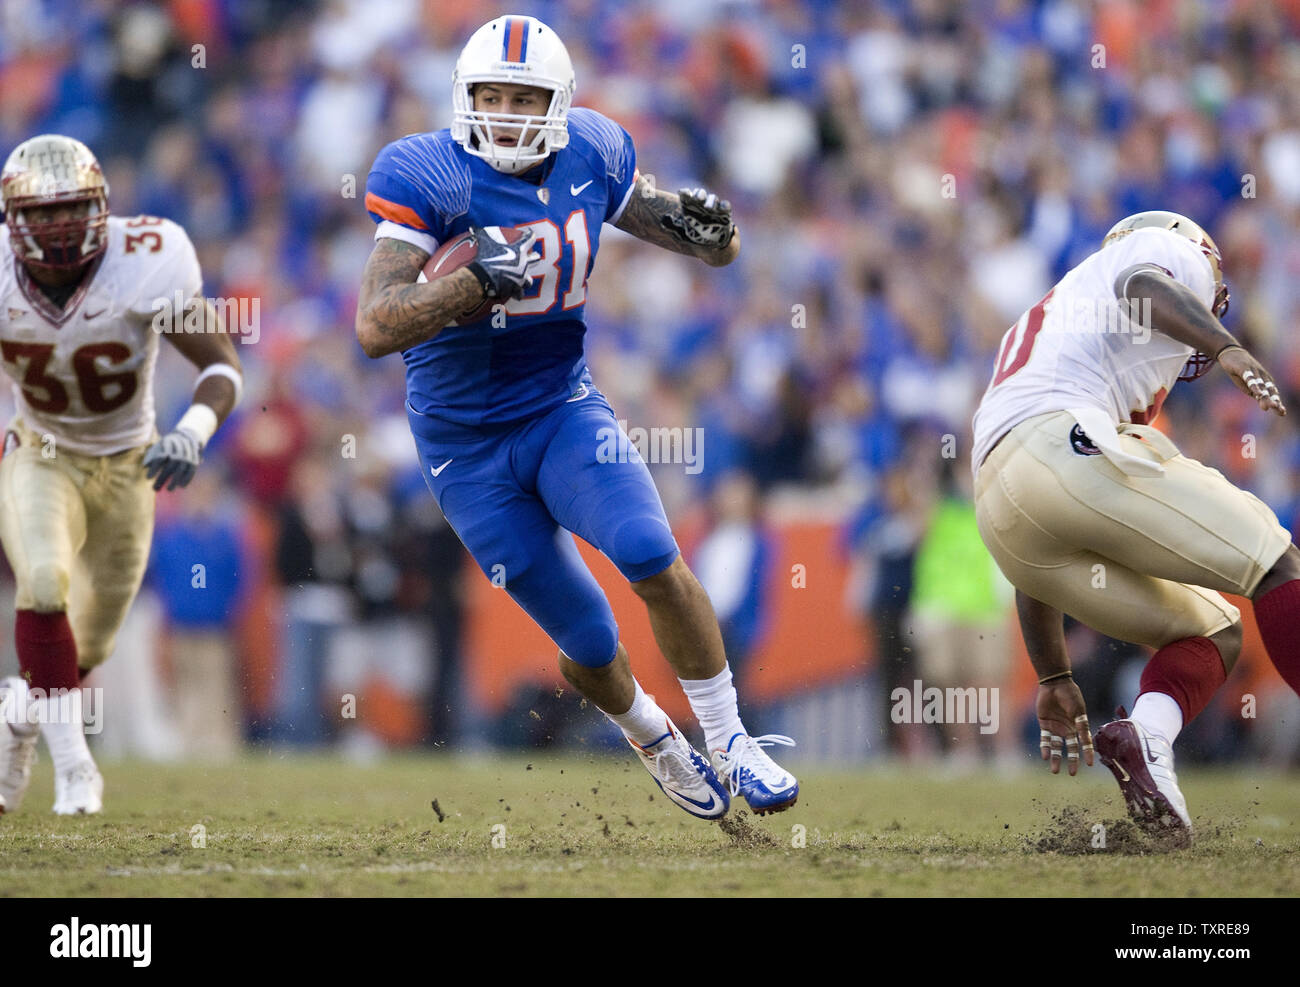 Florida Gator tight end Aaron Hernandez scores the second touchdown against the Florida State Seminoles in the first half of their NCAA football game in Gainesville, Florida November 28, 2009.  UPI/Mark Wallheiser Stock Photo